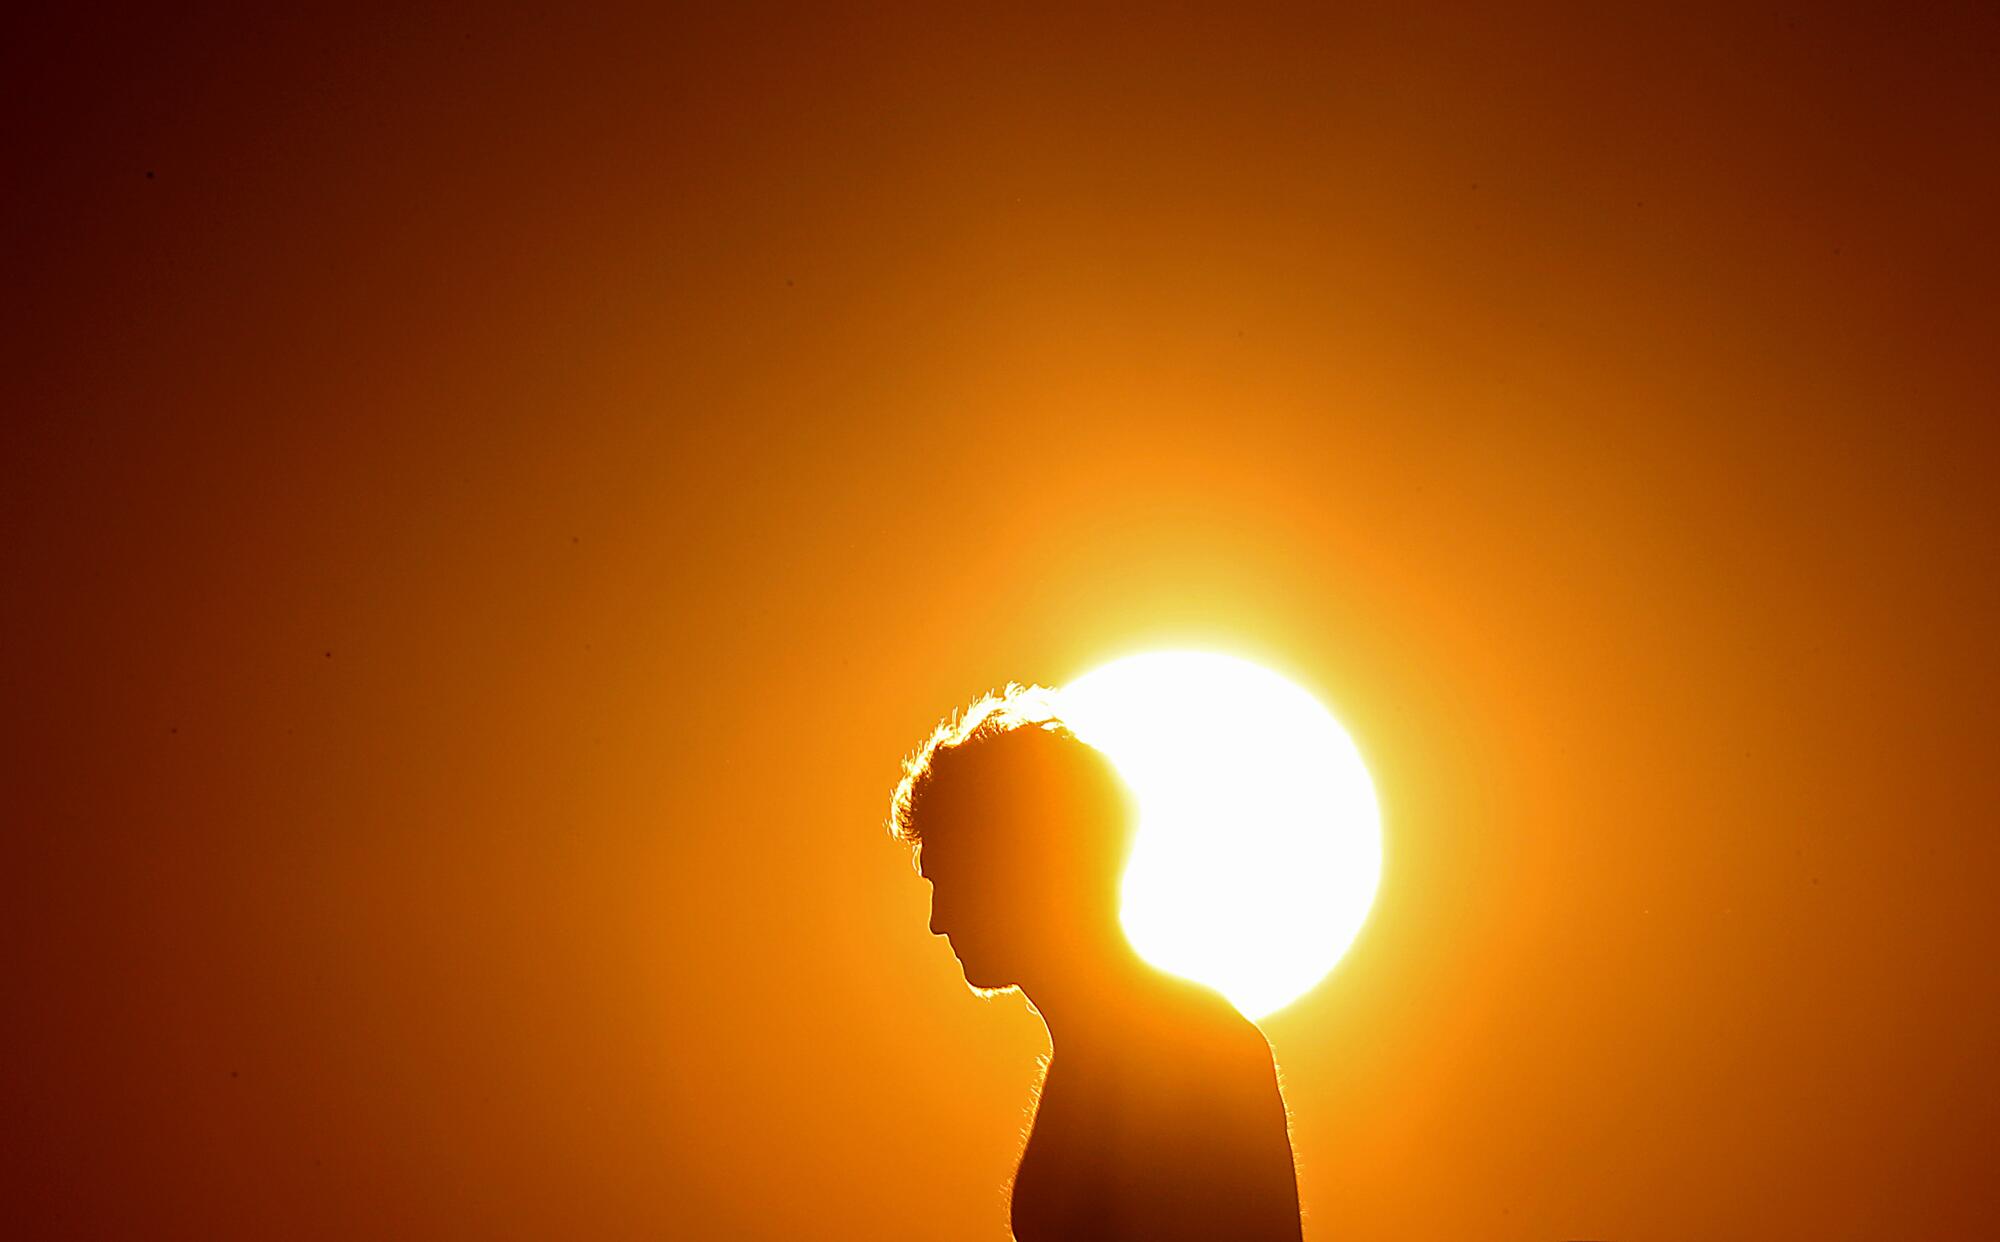 A man's head is silhouetted by the sun.